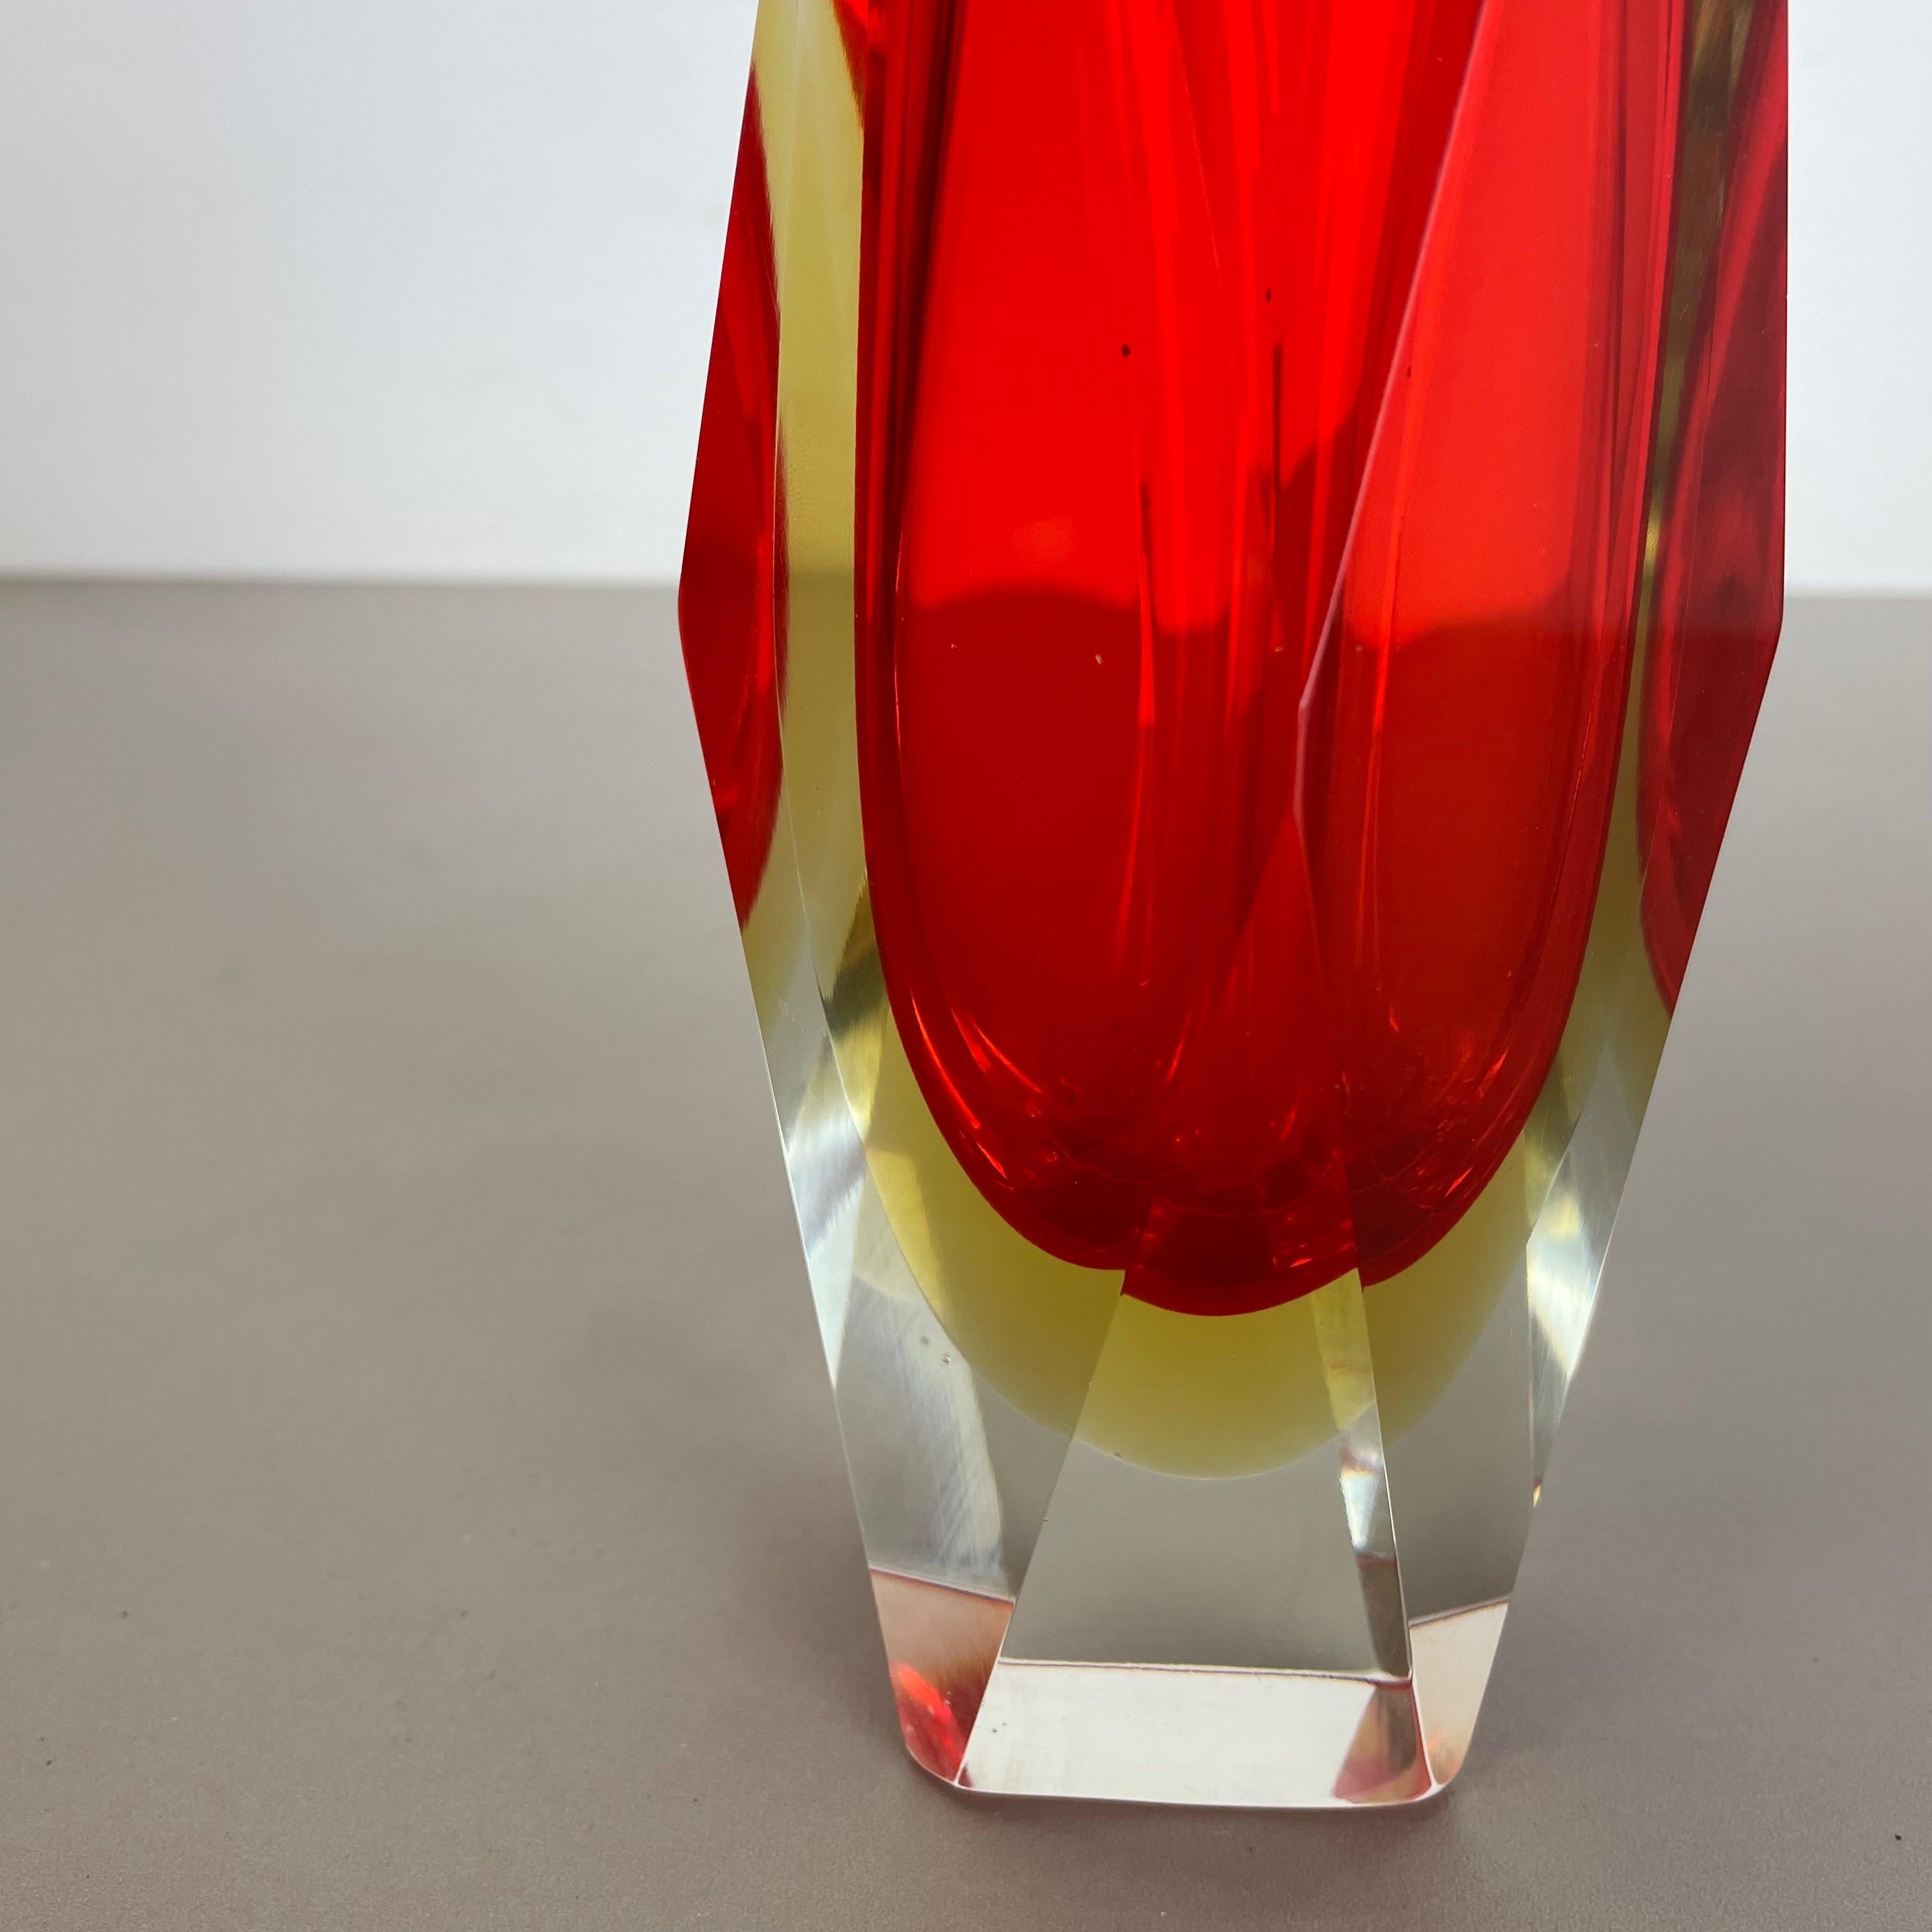 20th Century Large Red Murano Glass Sommerso Vase by Flavio Poli Attributed, Italy 1970s For Sale